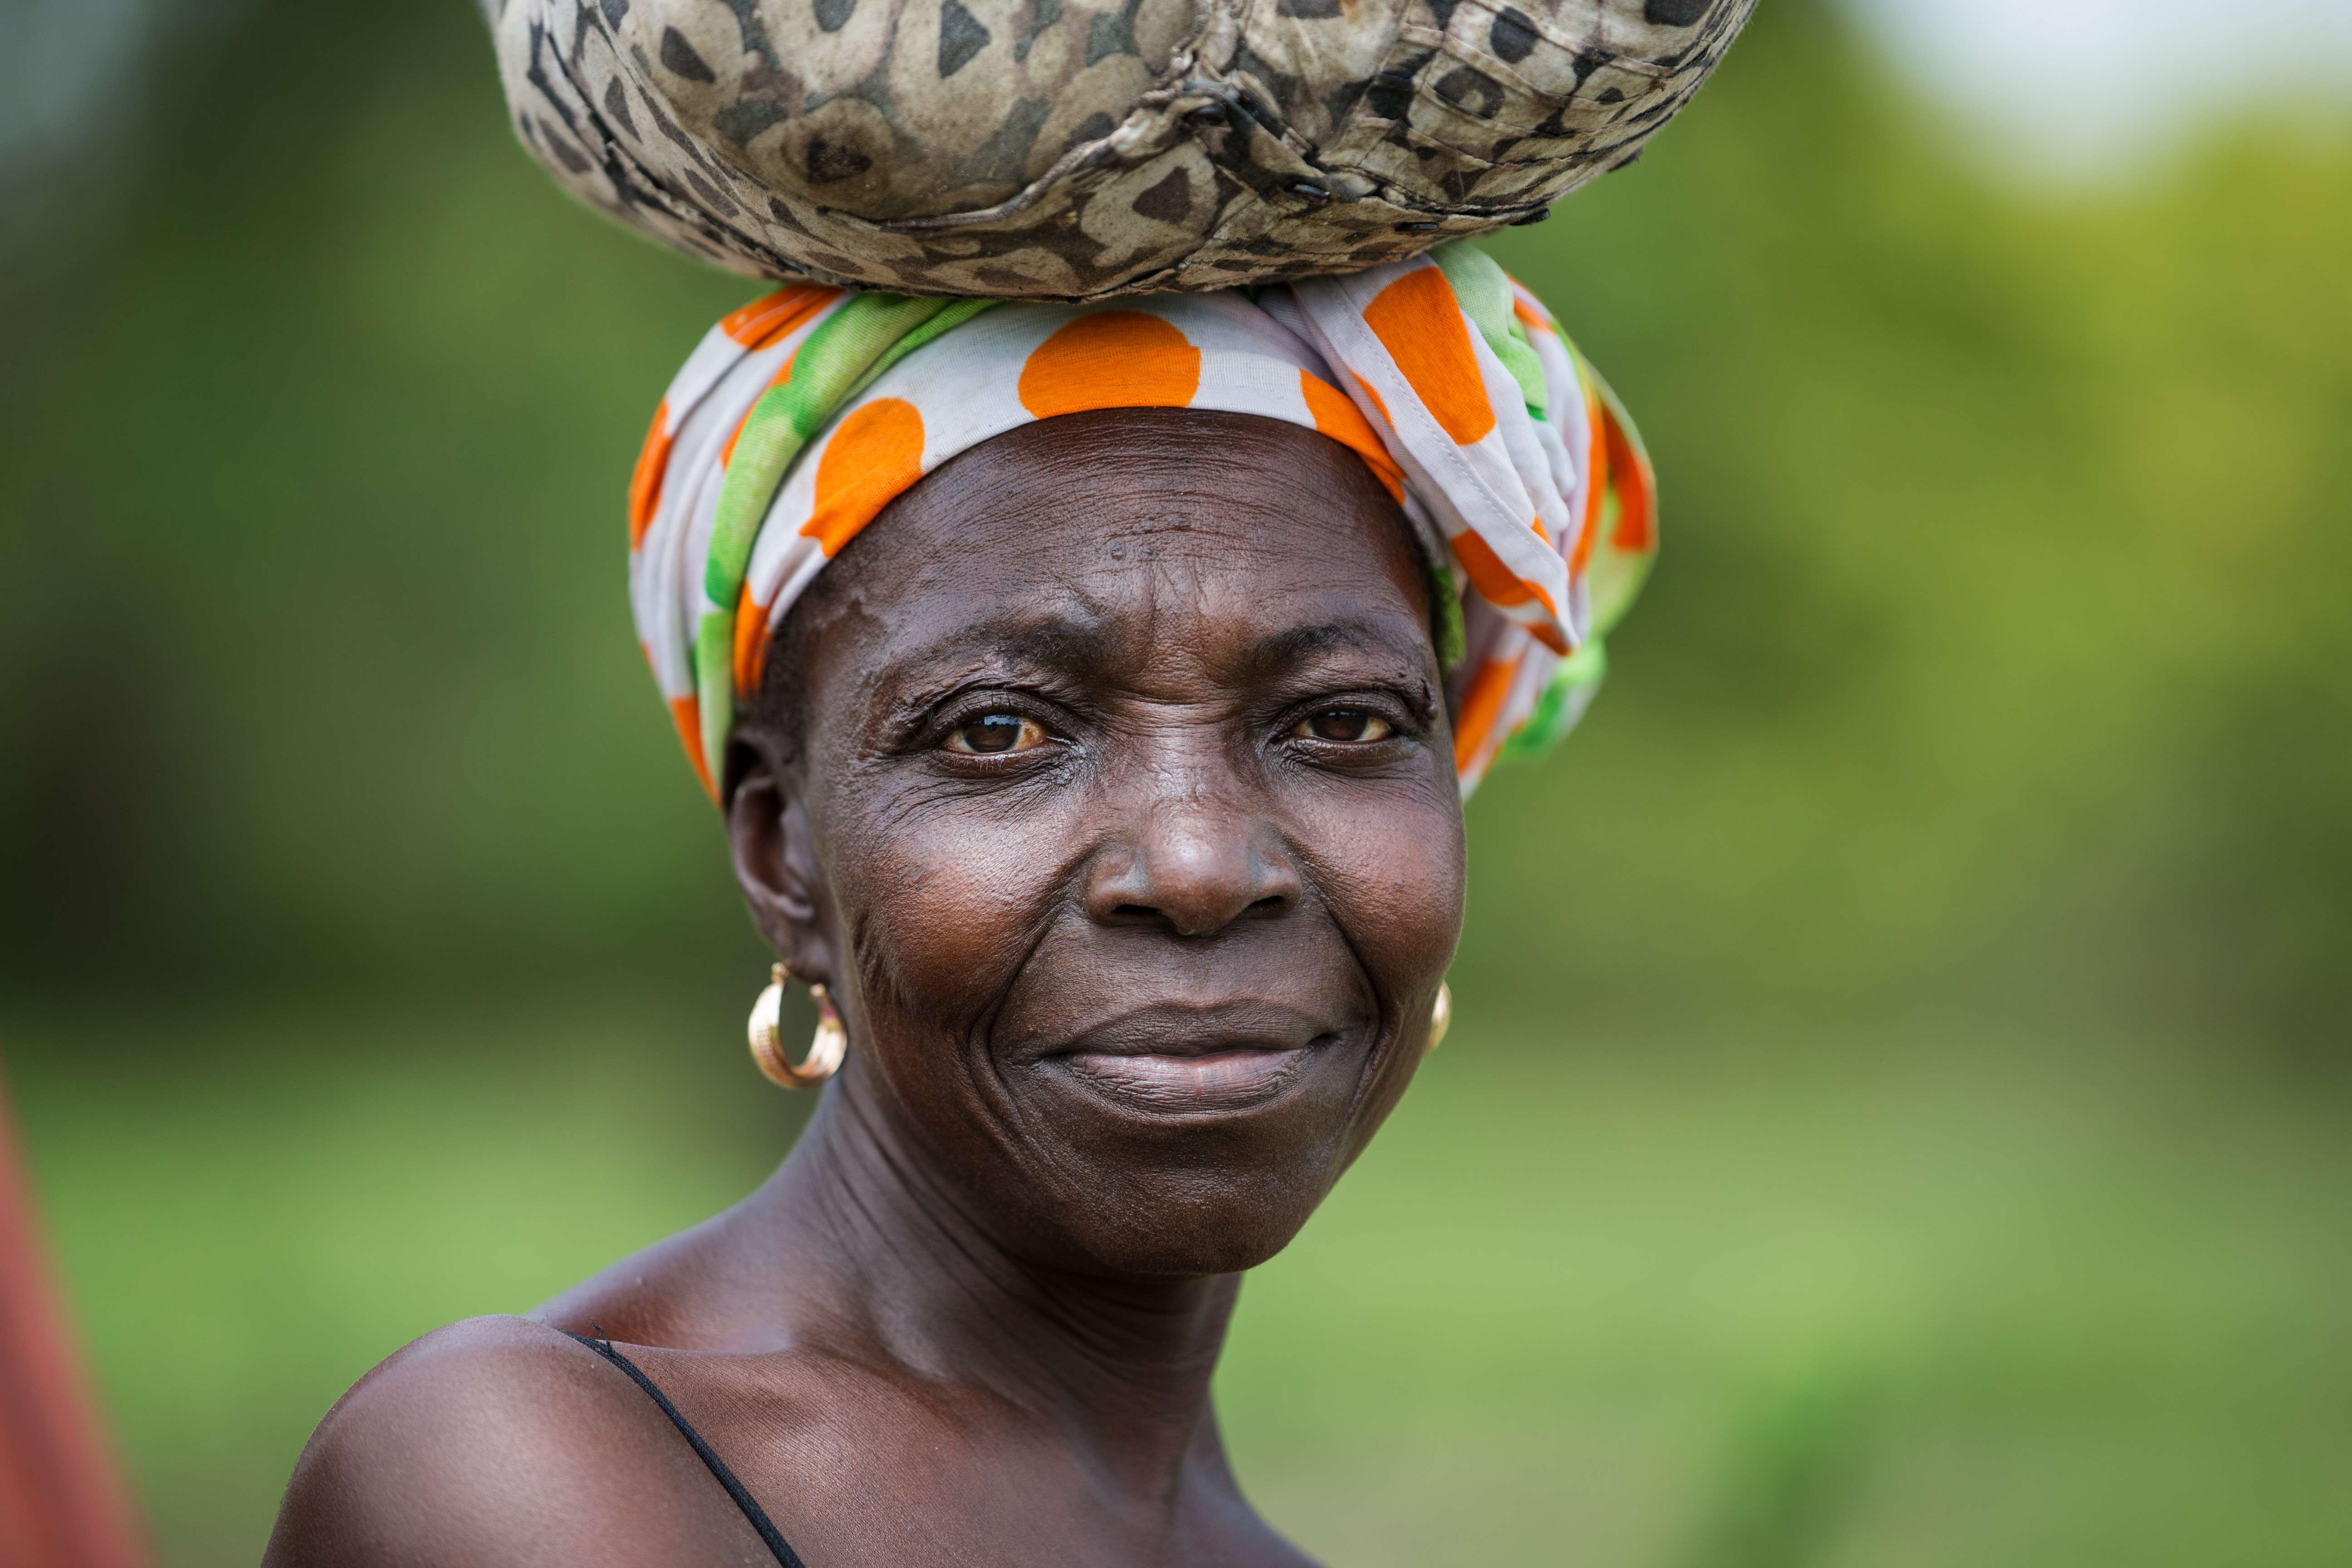 Under the inter-village development scheme, villagers such as Khady Diouf no longer damage the mangroves on a daily hunt for wild oysters but prefer to farm the area’s healthier soil. Pictures: Daniel Allen